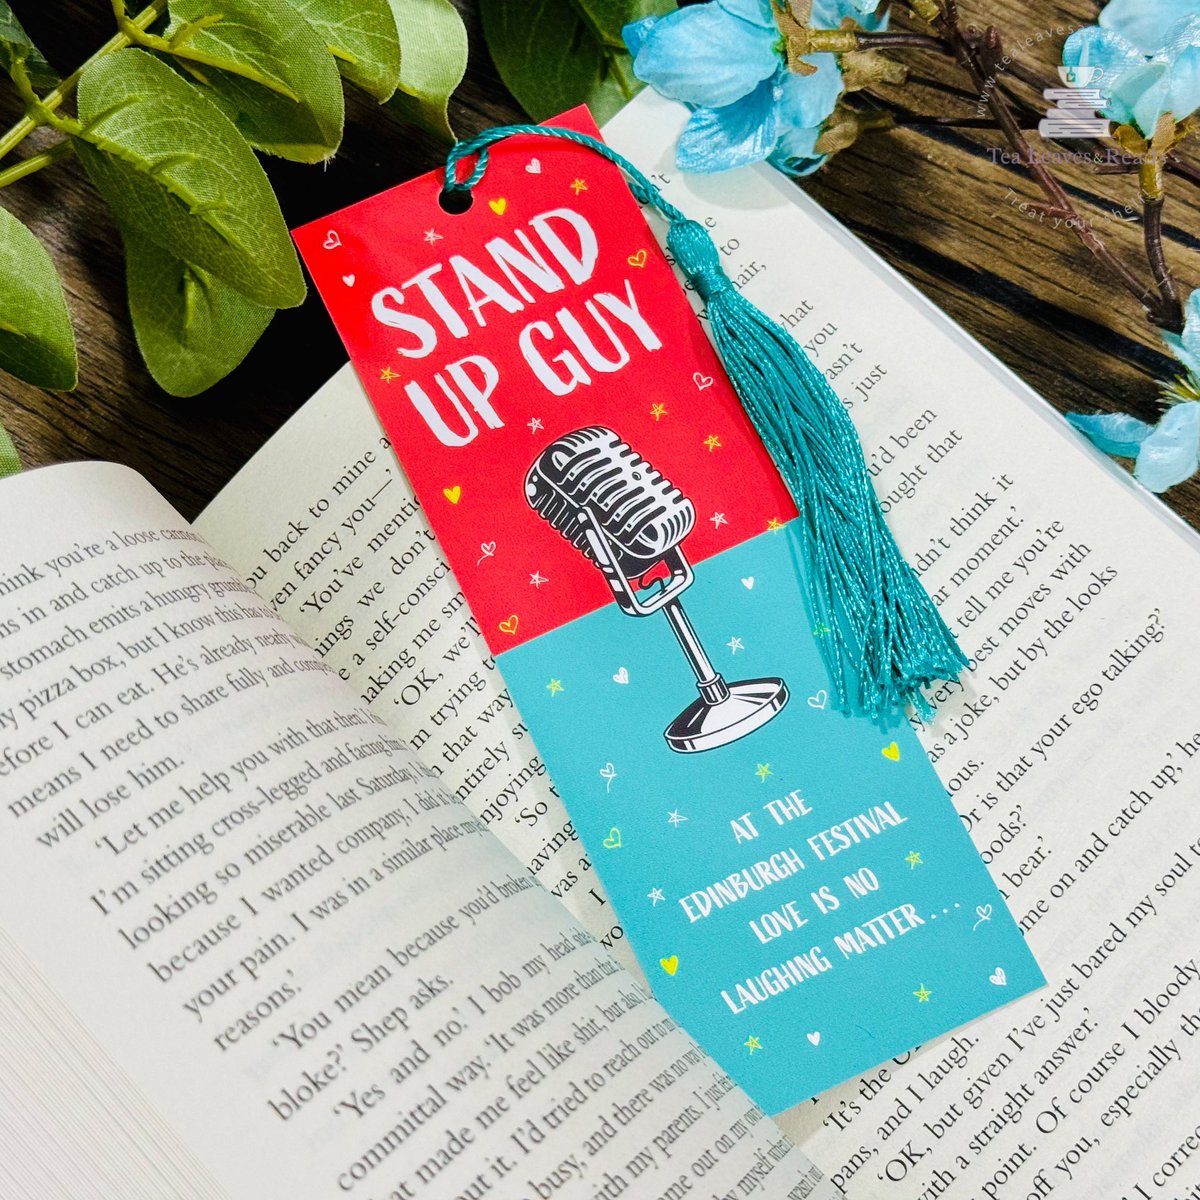 I just adore this STAND UP GUY bookmark that @TeaLeaves_Reads designed and included in their March subscription box! 😍📚 #BookTwitter #romcom #writerslife